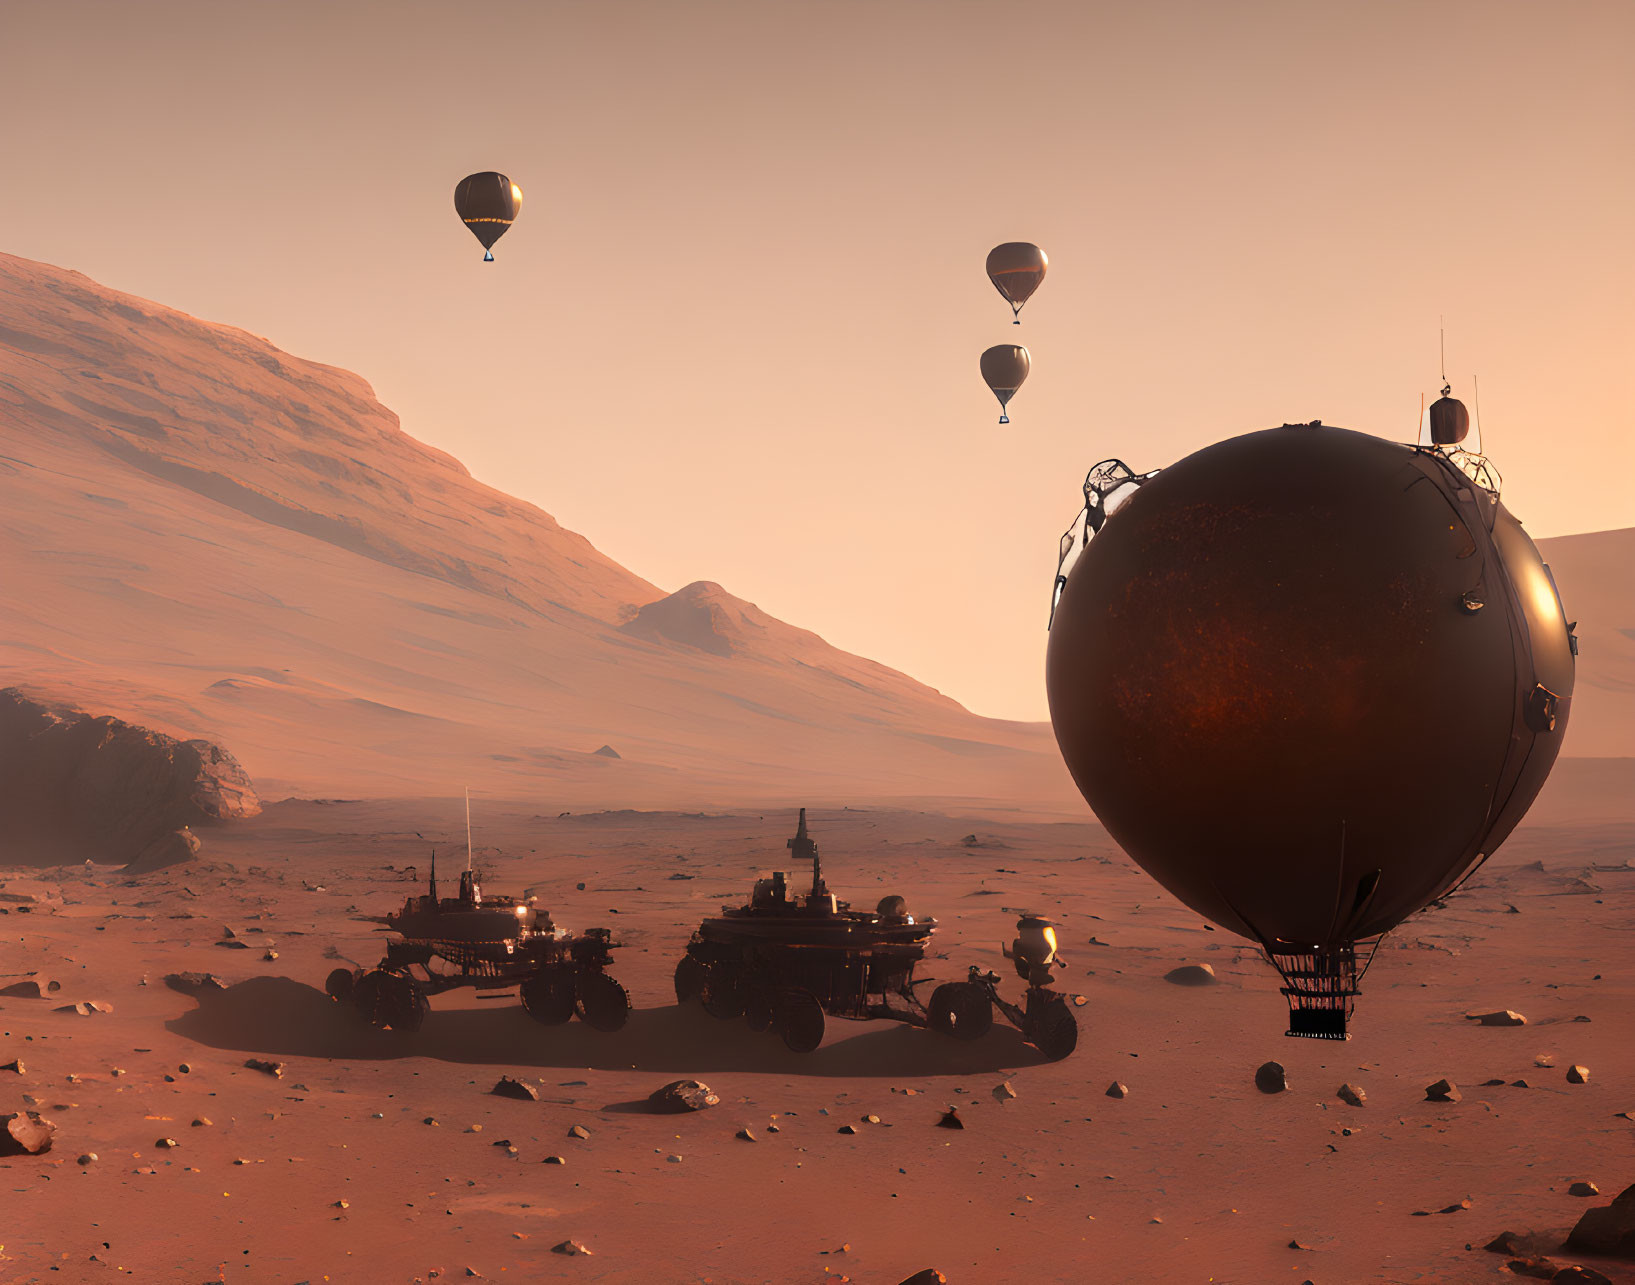 Martian landscape at dusk with hot air balloons, habitat module, and rovers.